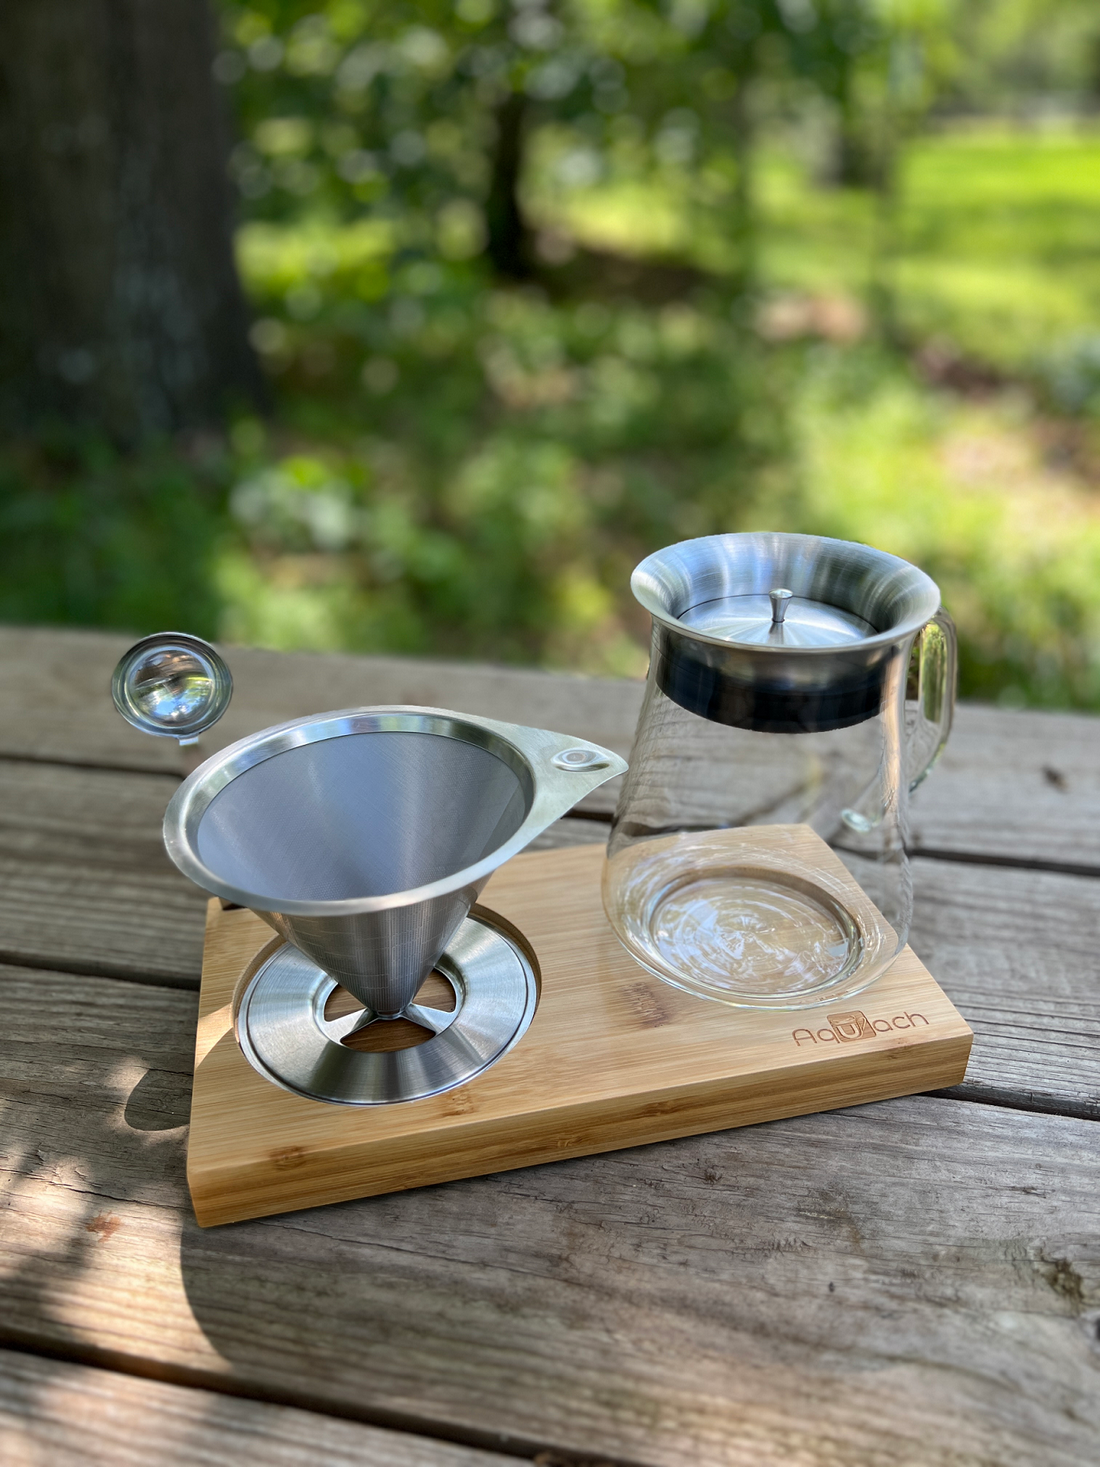 Coffee Product Review - Aquach Pour Over Coffee Maker set